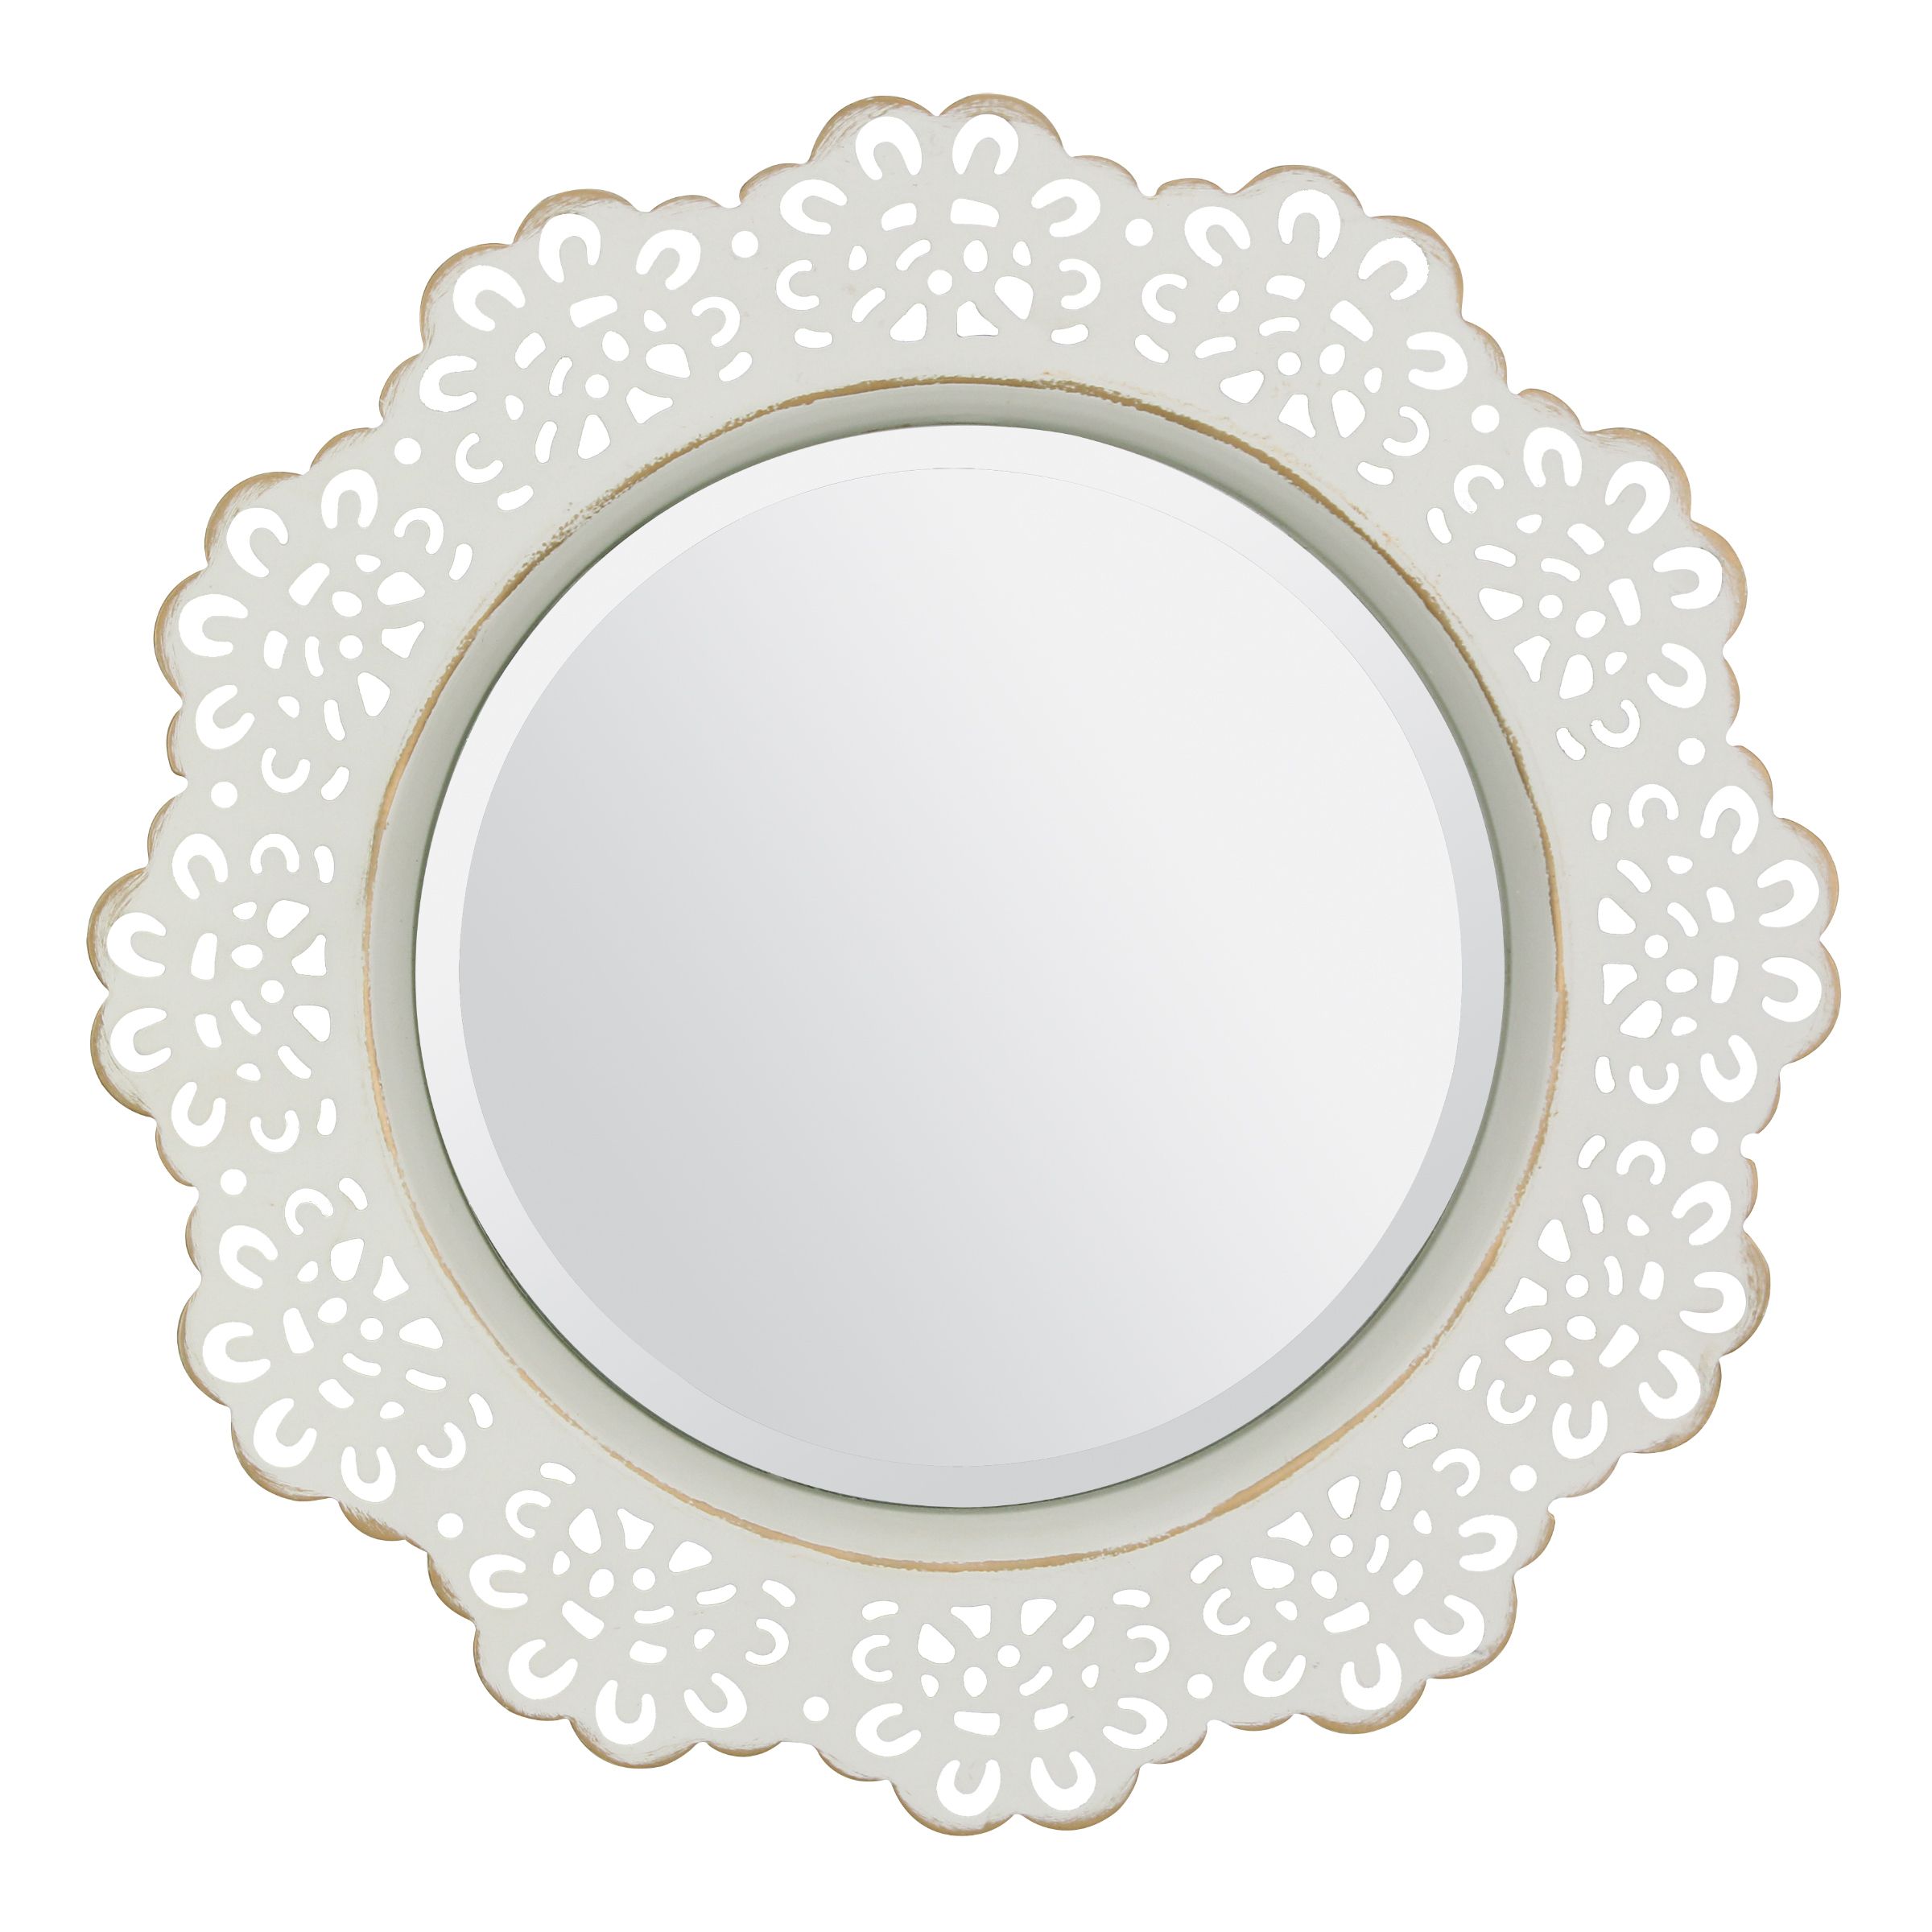 Stonebriar Decorative Round Metal Lace Wall Mirror, White With Gold Pertaining To Stitch White Round Wall Mirrors (View 5 of 15)